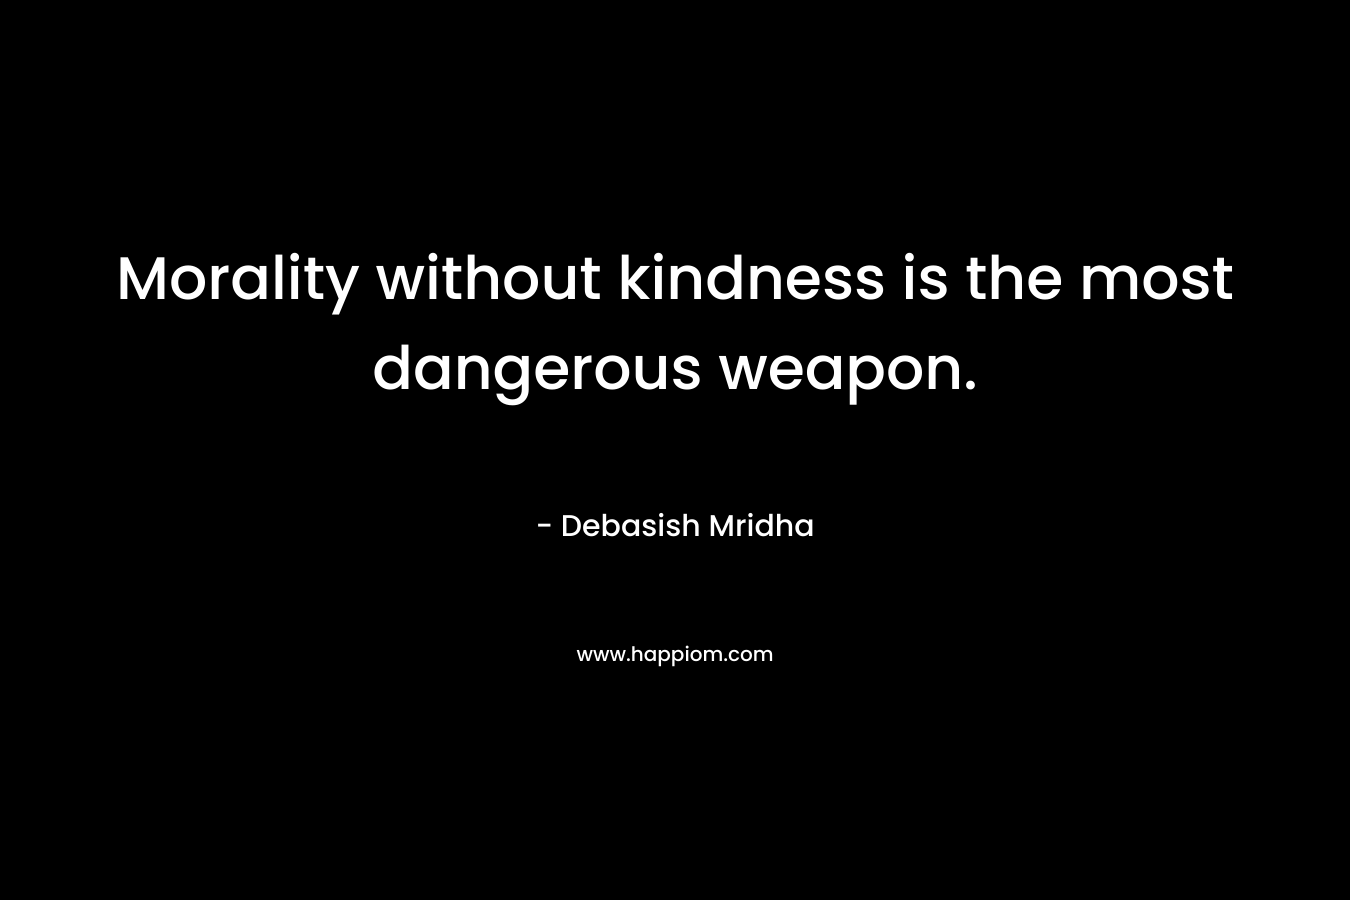 Morality without kindness is the most dangerous weapon.